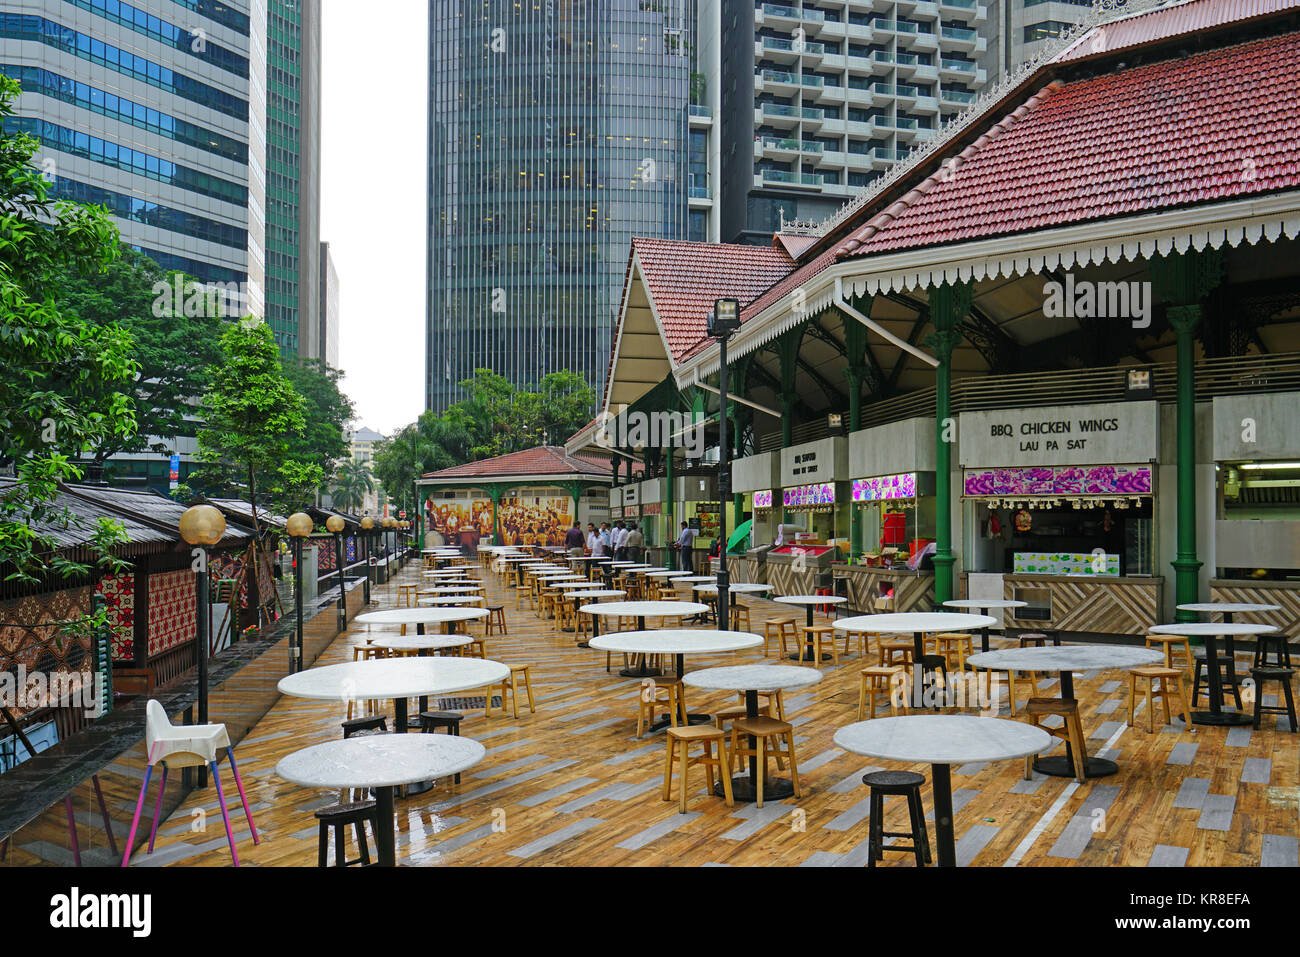 The Lau Pa Sat festival market (Telok Ayer), a historic Victorian cast-iron market building used as a popular food court hawker center in Singapore Stock Photo